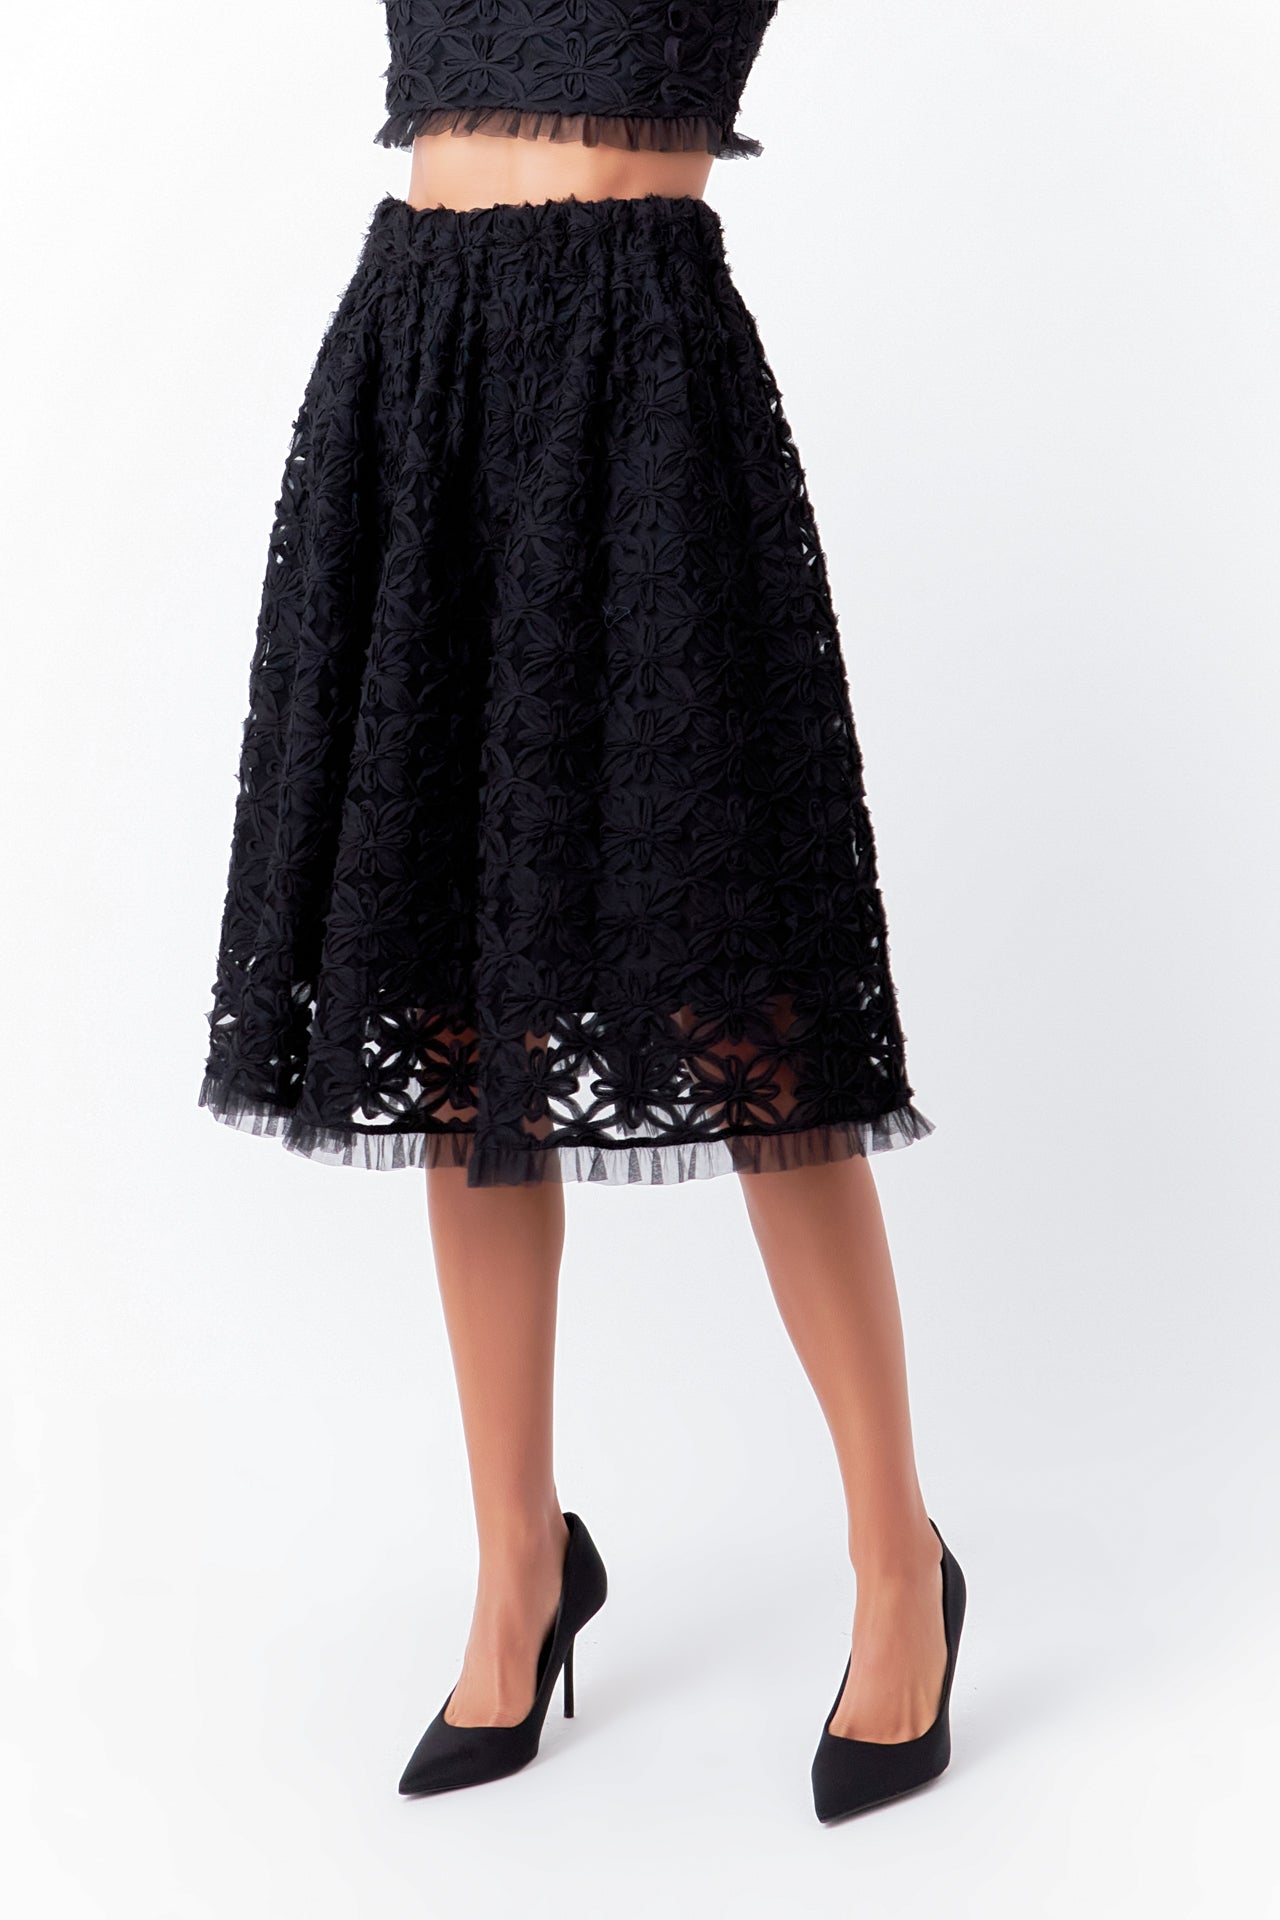 Endless Rose - Floral Lace Midi Skirt - Skirts in Women's Clothing available at endlessrose.com